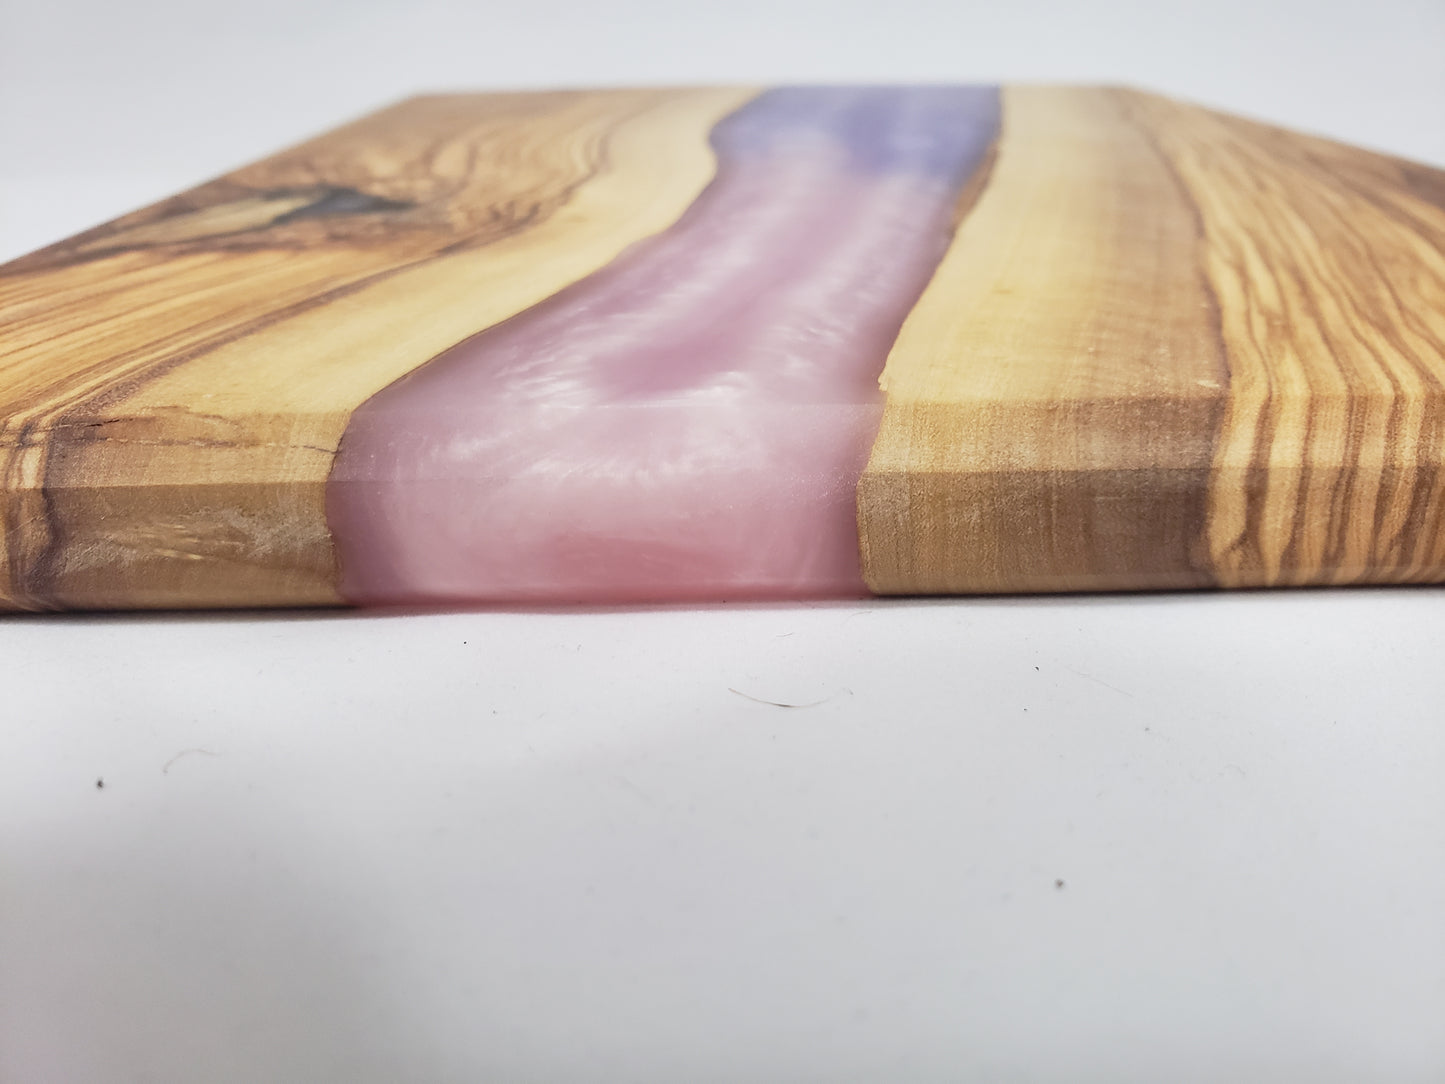 "Lady Olivia" Olive and Epoxy River Charcuterie Board